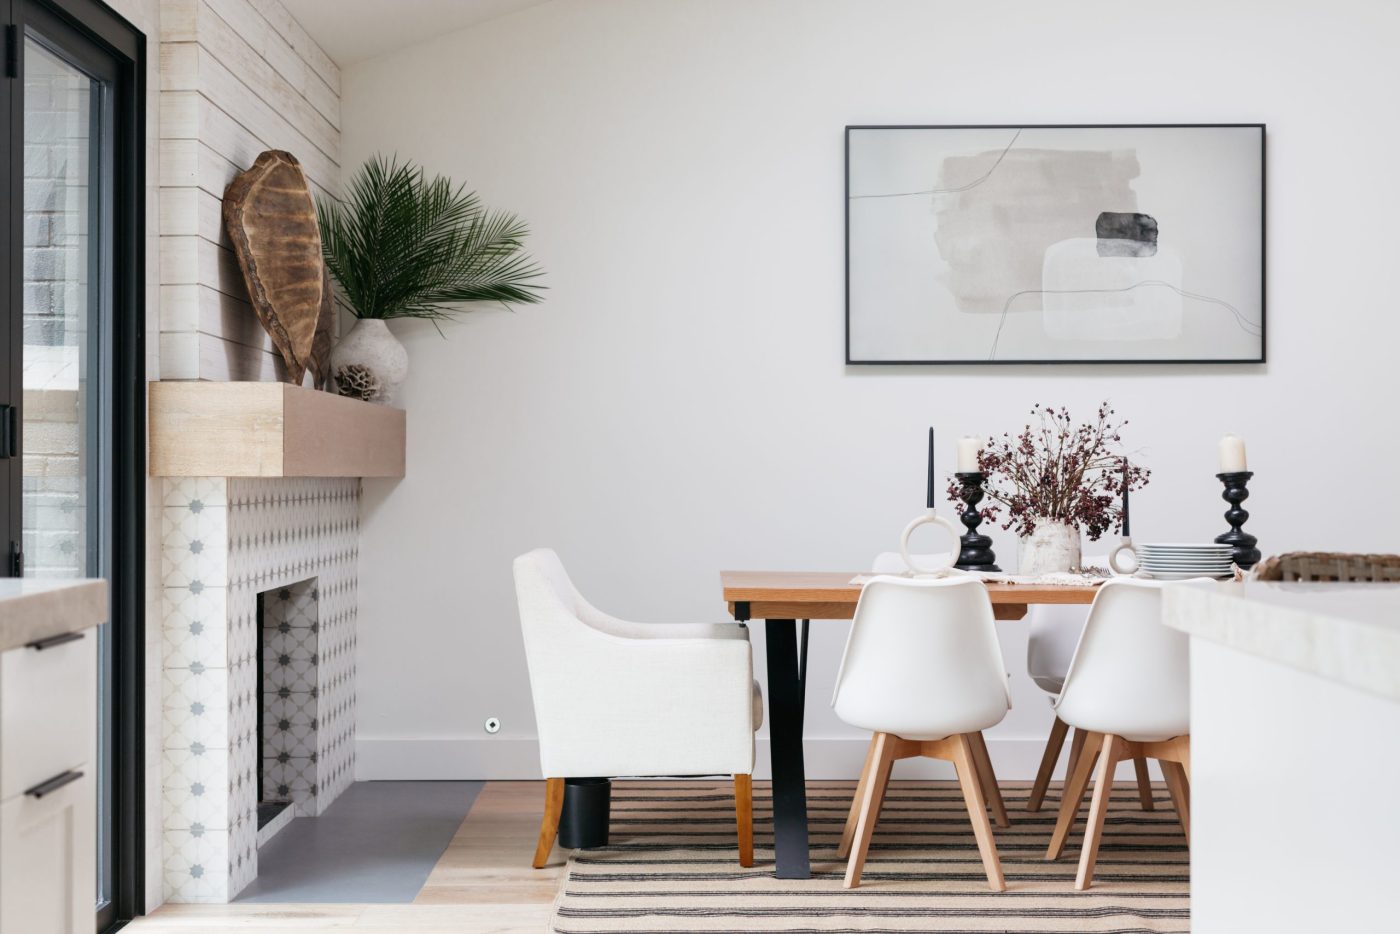 Black, white, and tan dining area that includes a fireplace